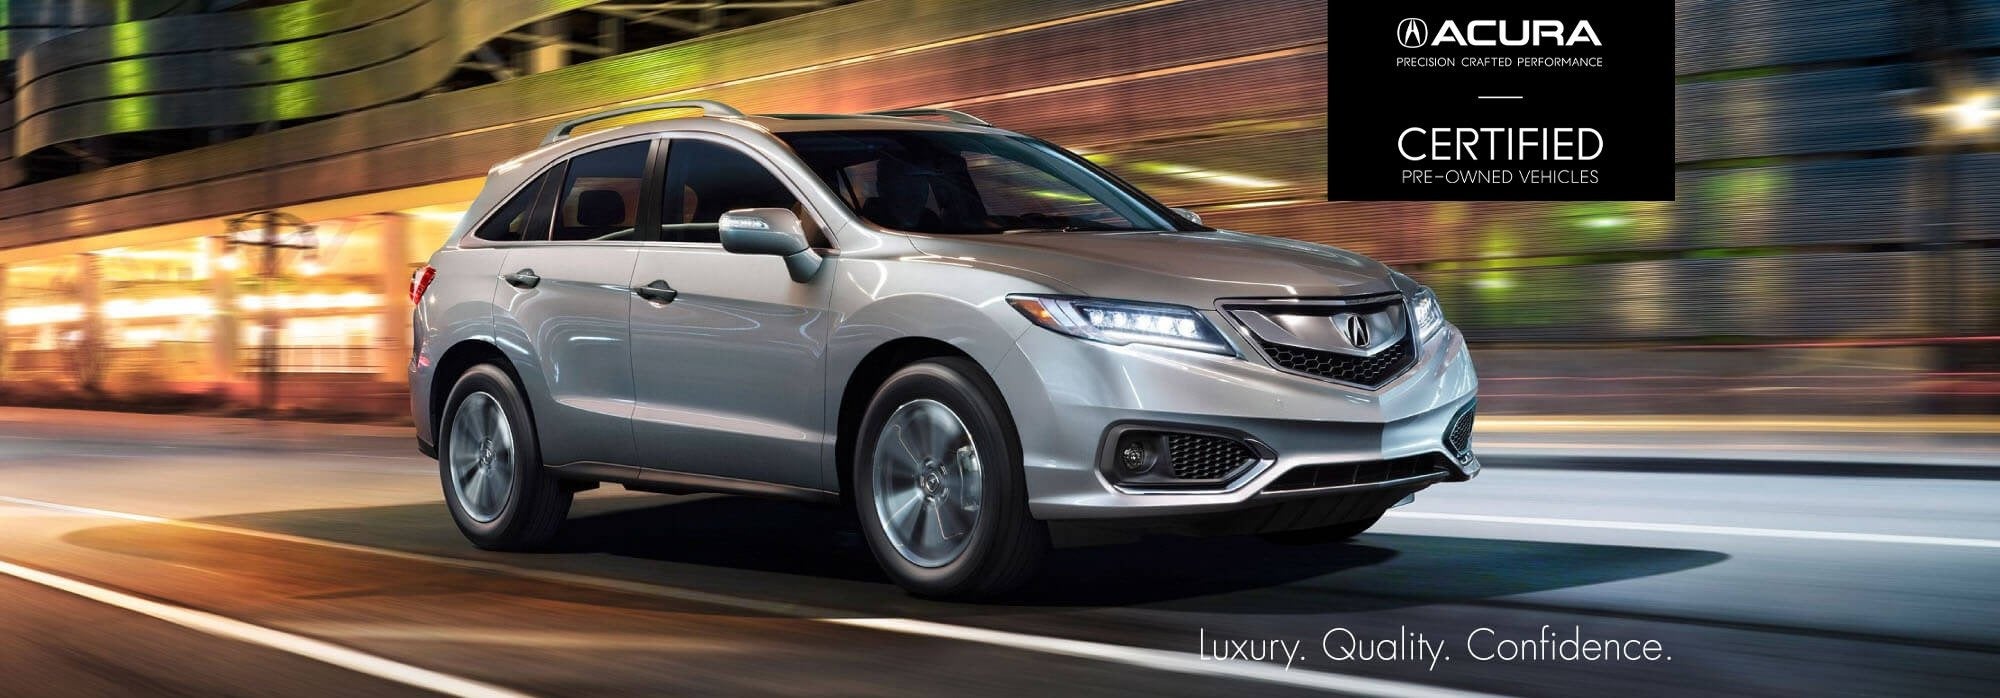 banner image of Acura Certified Pre-Owned